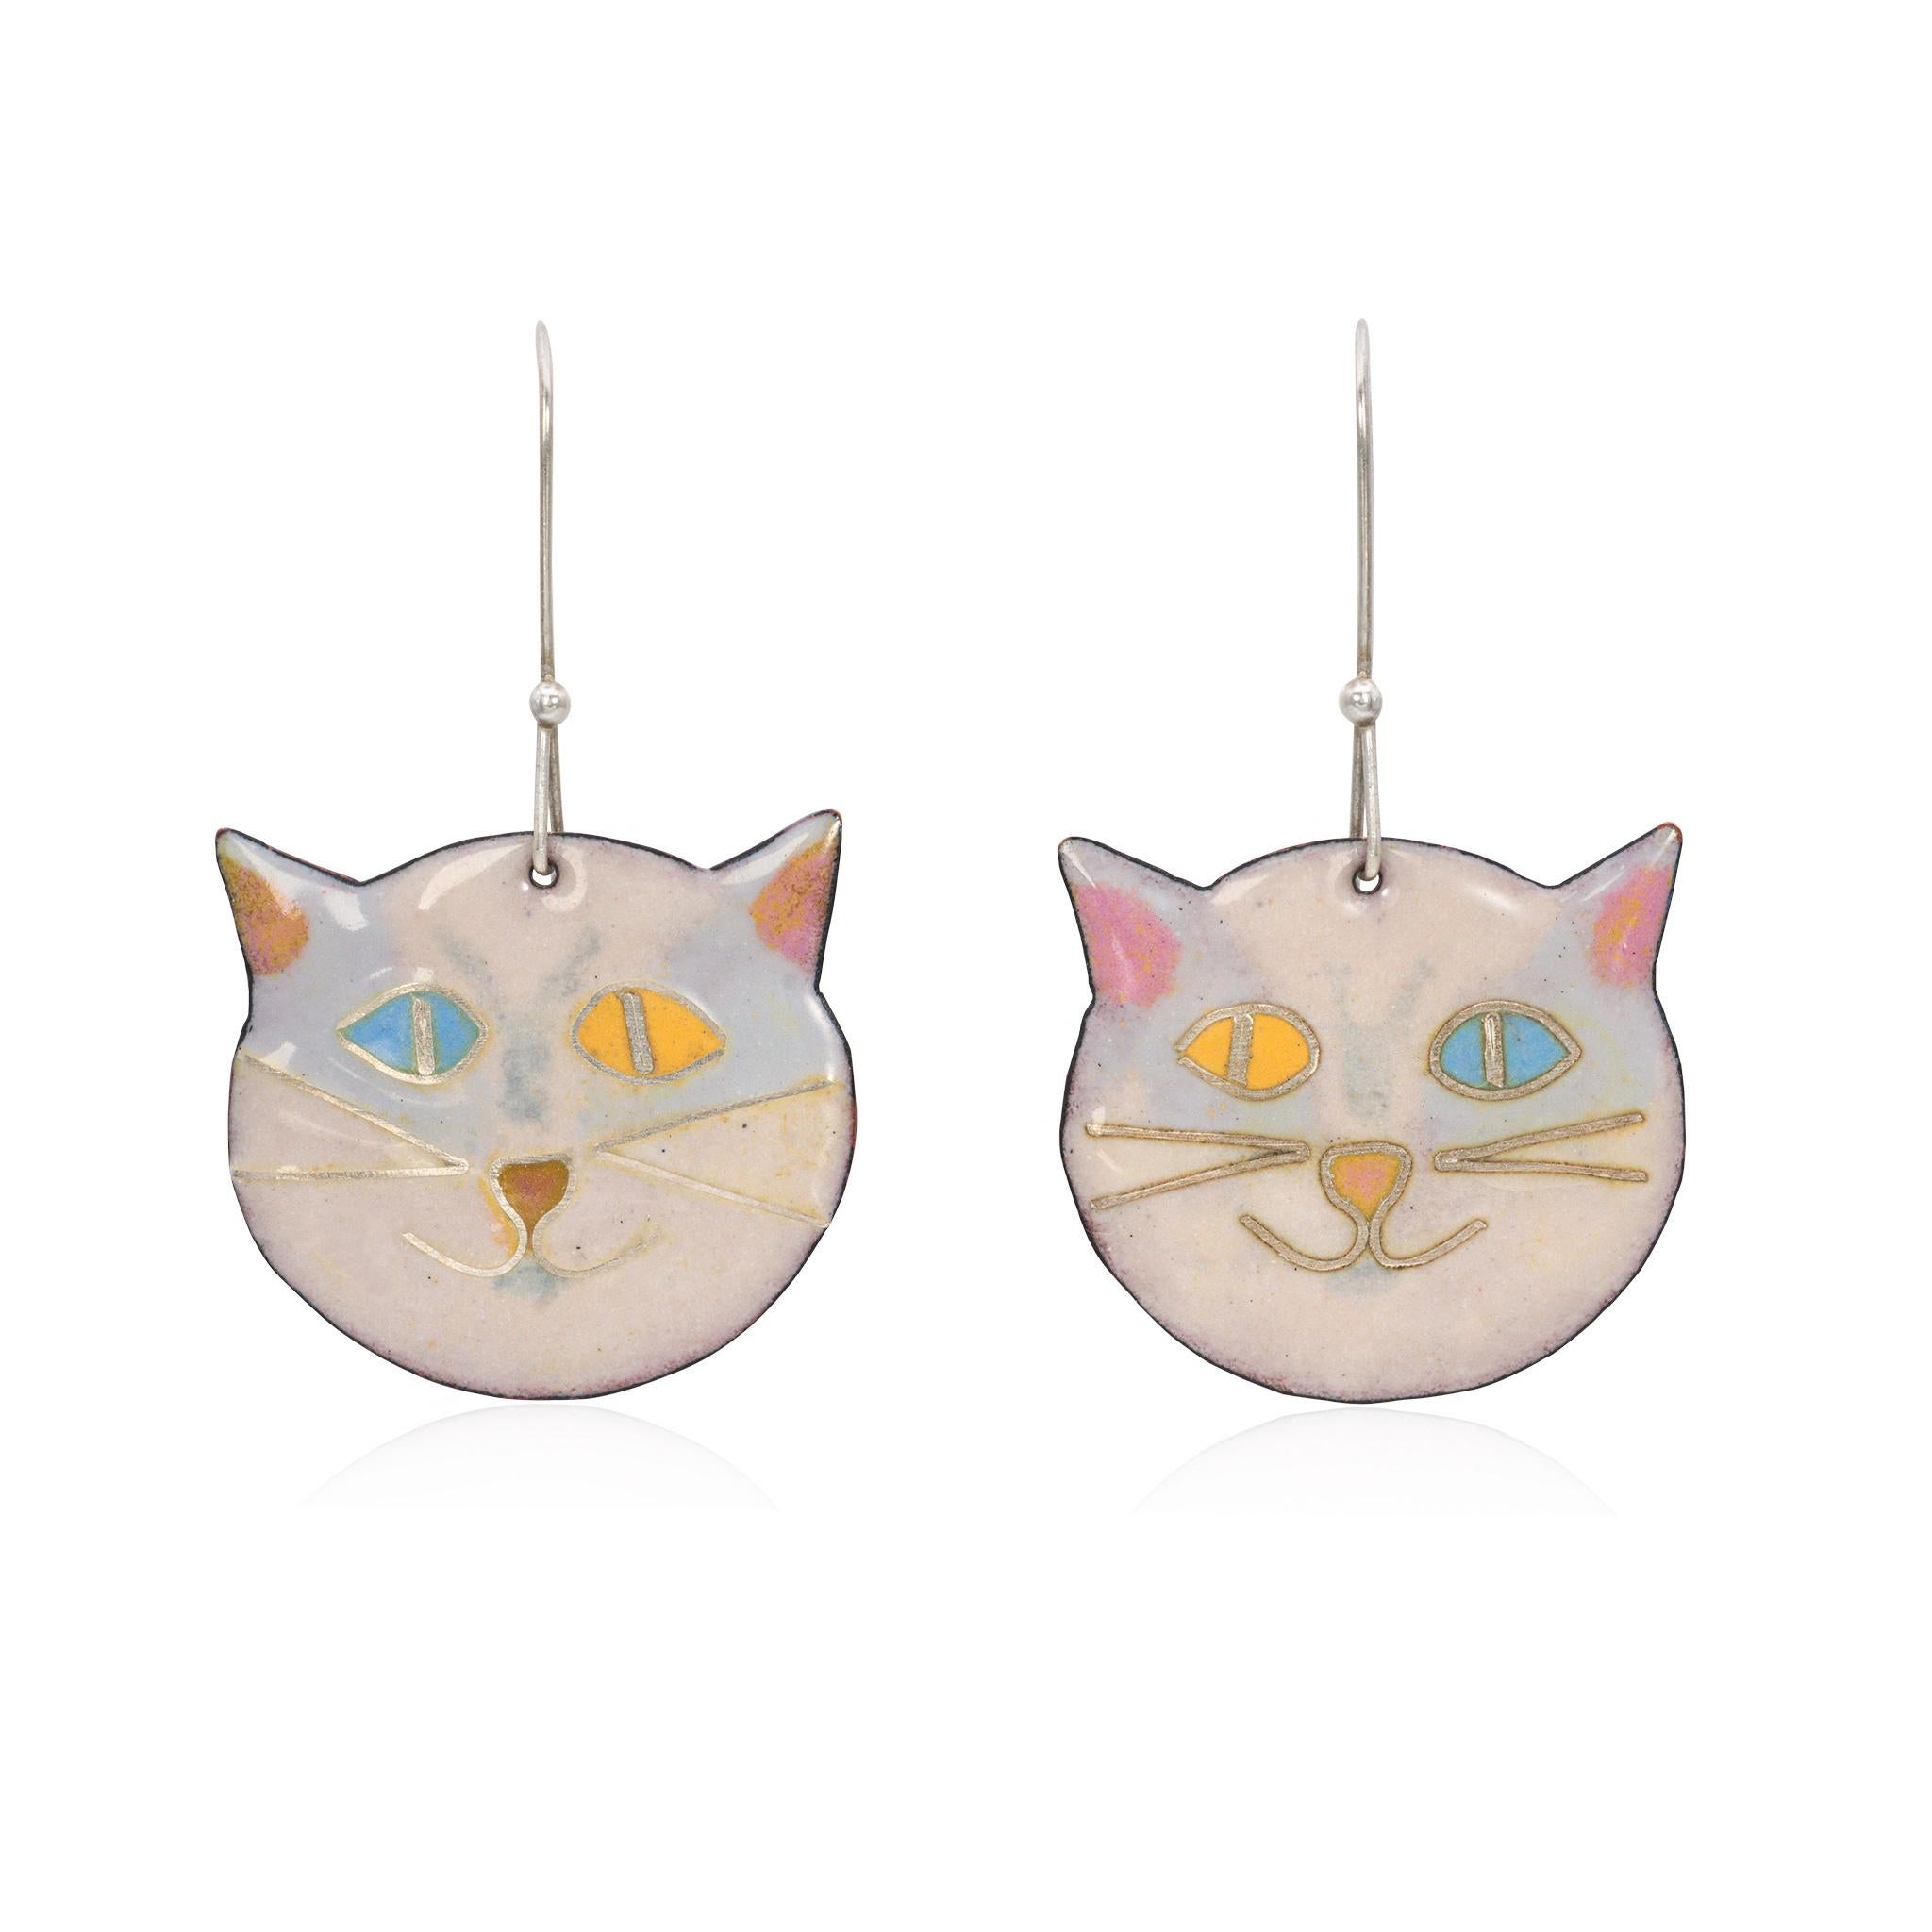 You'll be the cat's meow with these adorable Black Kitty Kat Earrings designed by Merideth McGregor. For all cat lovers out there these April in Paris Designs earrings are just for you! These unique hand painted enamel earrings are sure to put a